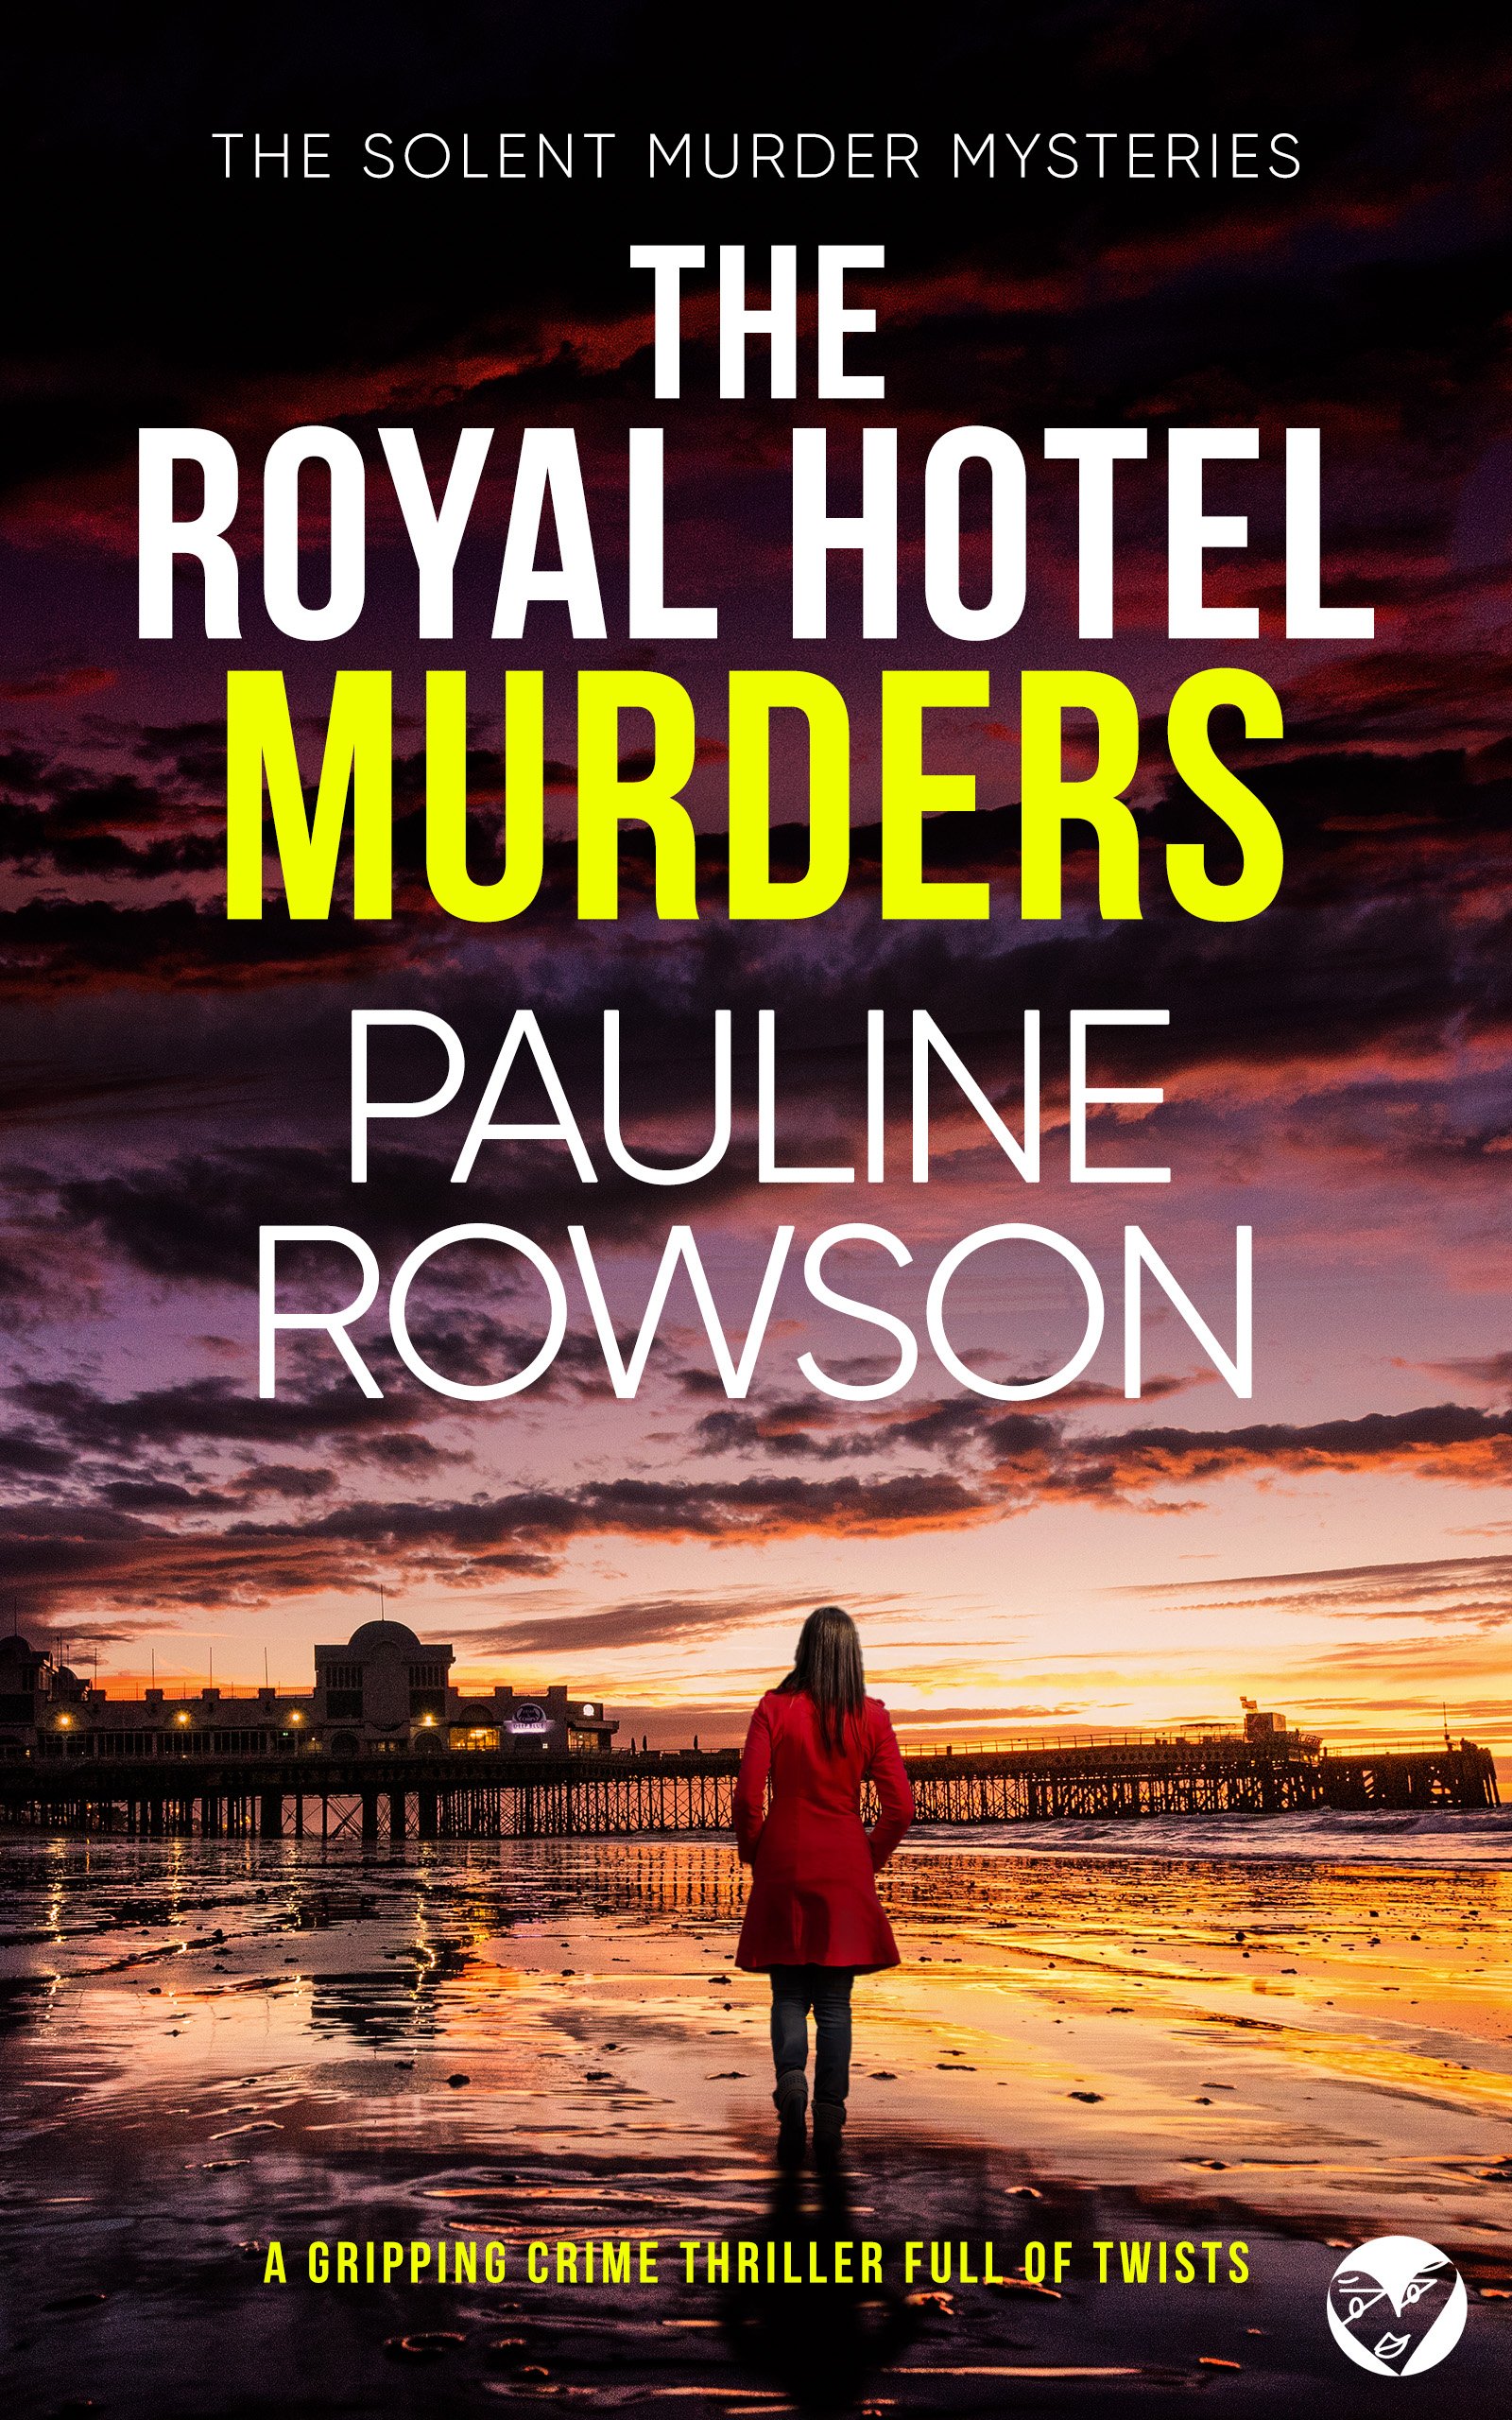 THE ROYAL HOTEL MURDERS Cover publish.jpg